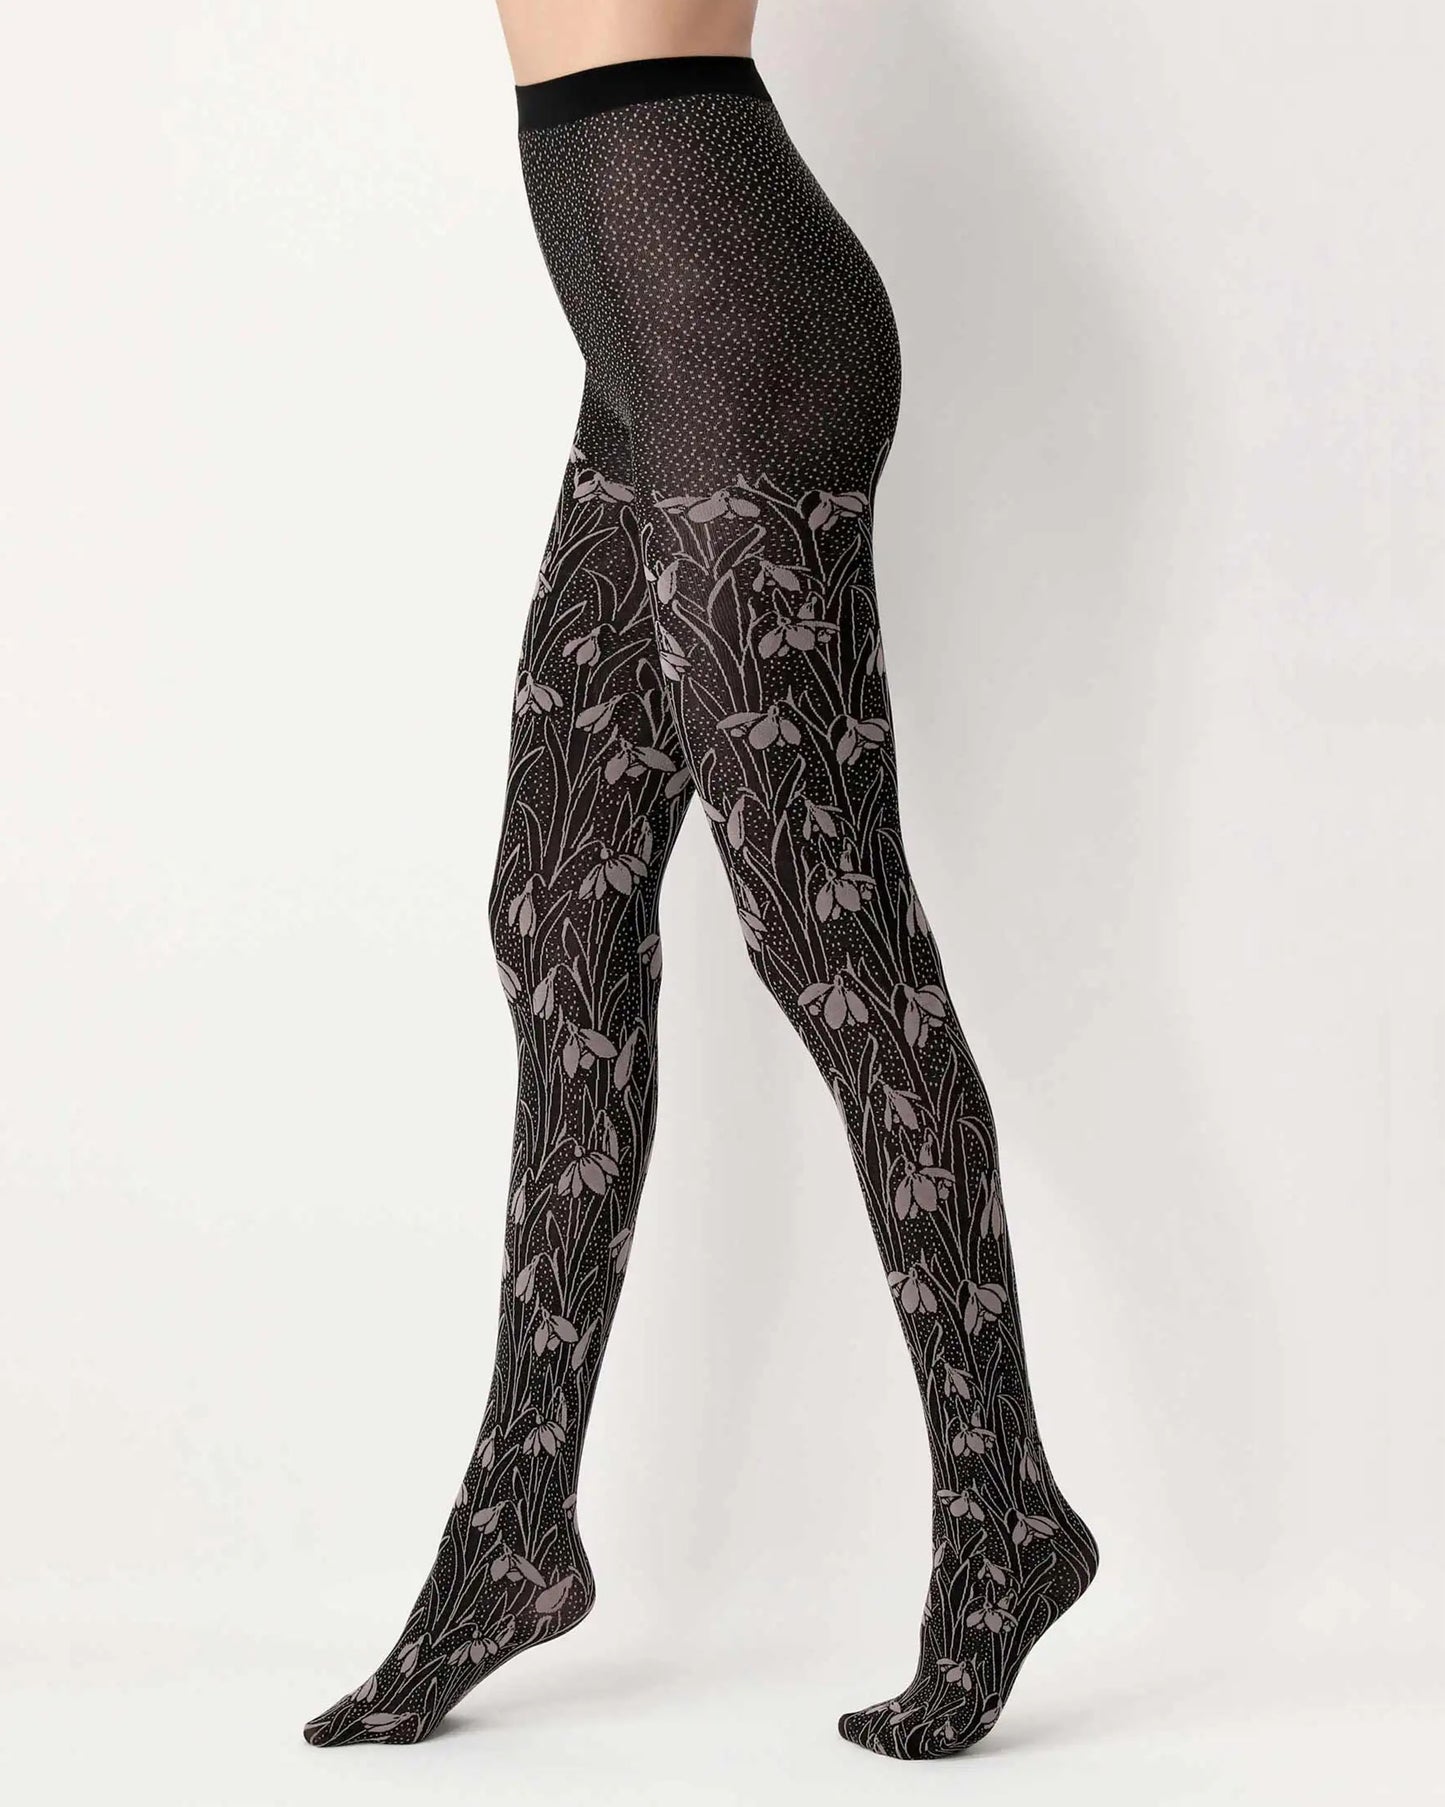 Oroblù I Love First Class Flowers Tights - Black opaque fashion tights with an all over snowdrops floral pattern in beige with a speckled background